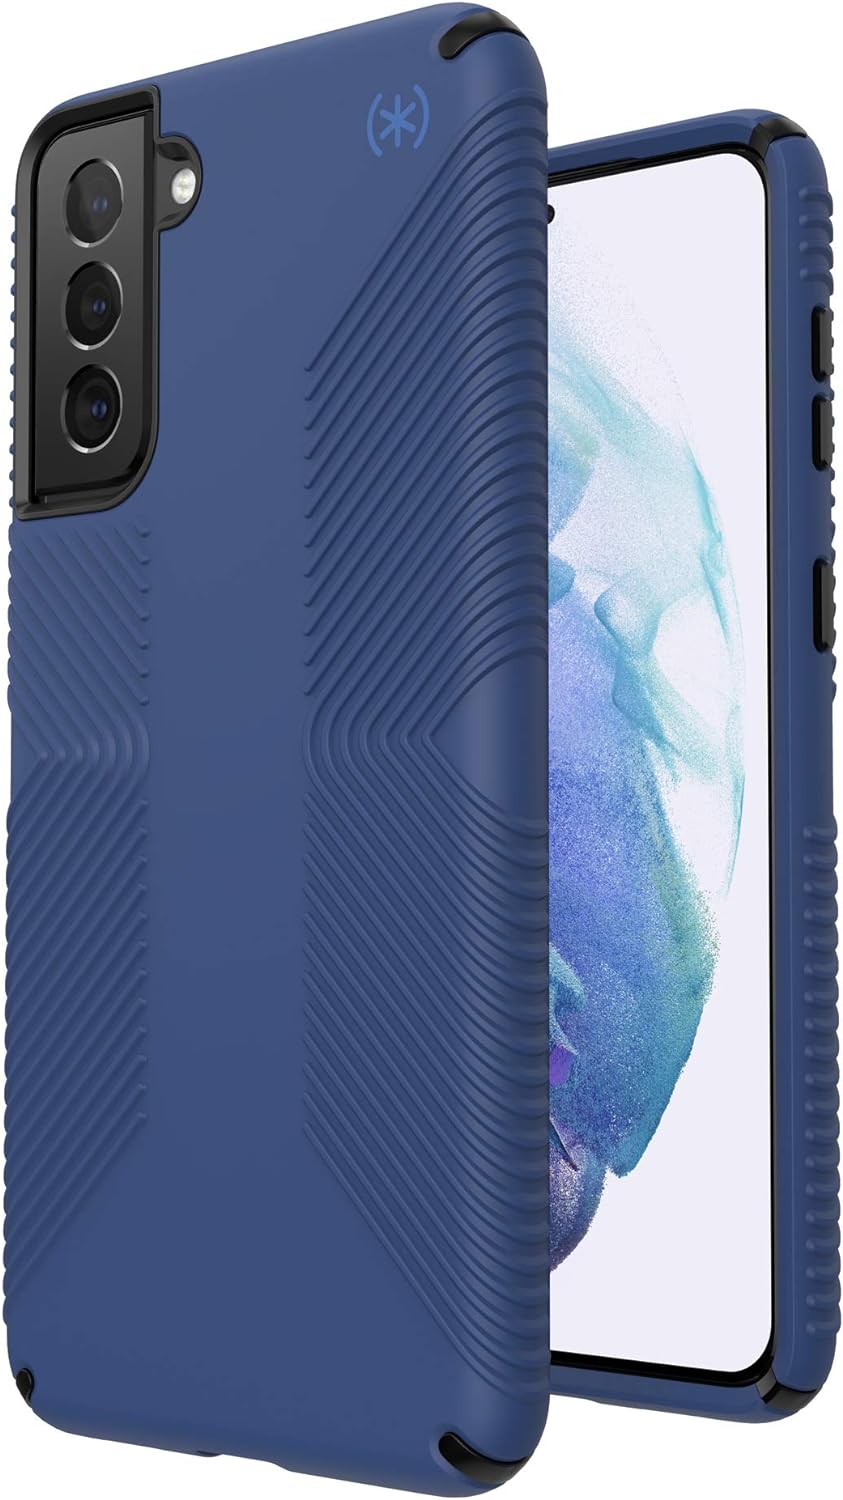 Speck Presidio2 Grip Case for Samsung Galaxy S21 Plus 5G with 13ft Drop Protection - Blue/Black